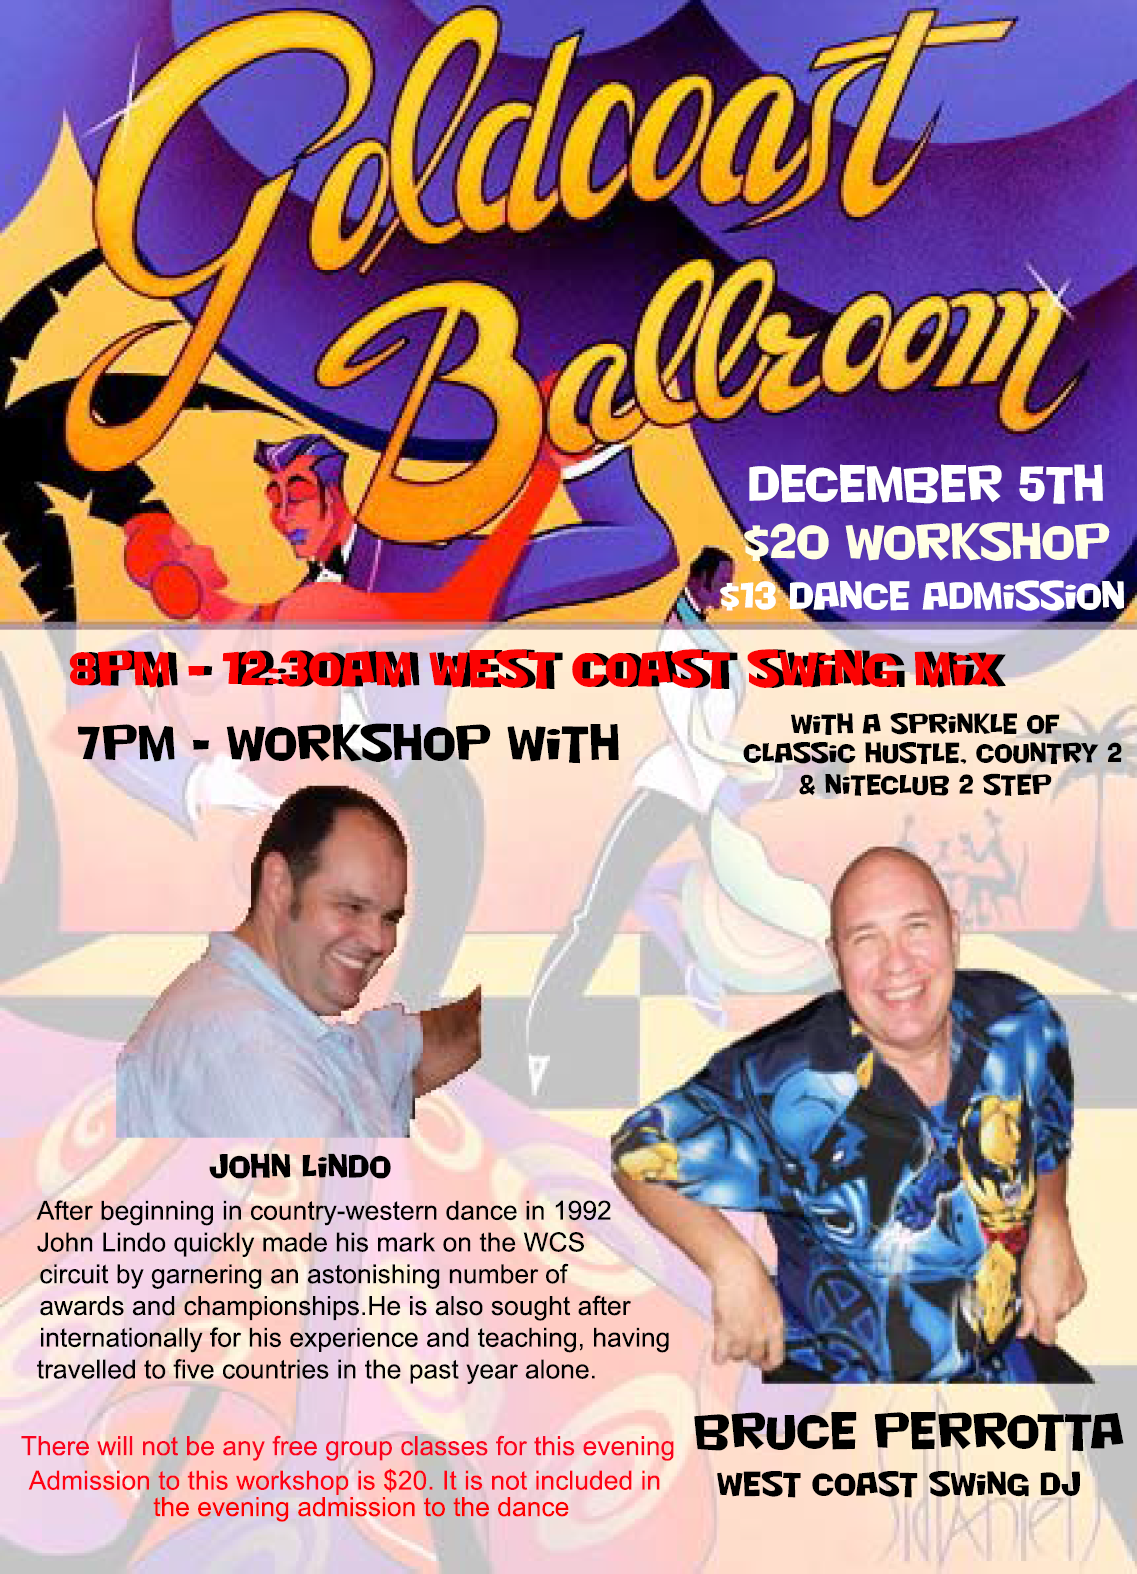 Click to Print: Special West Coast Swing Night at Goldcoast Ballroom - December 5, 2014!